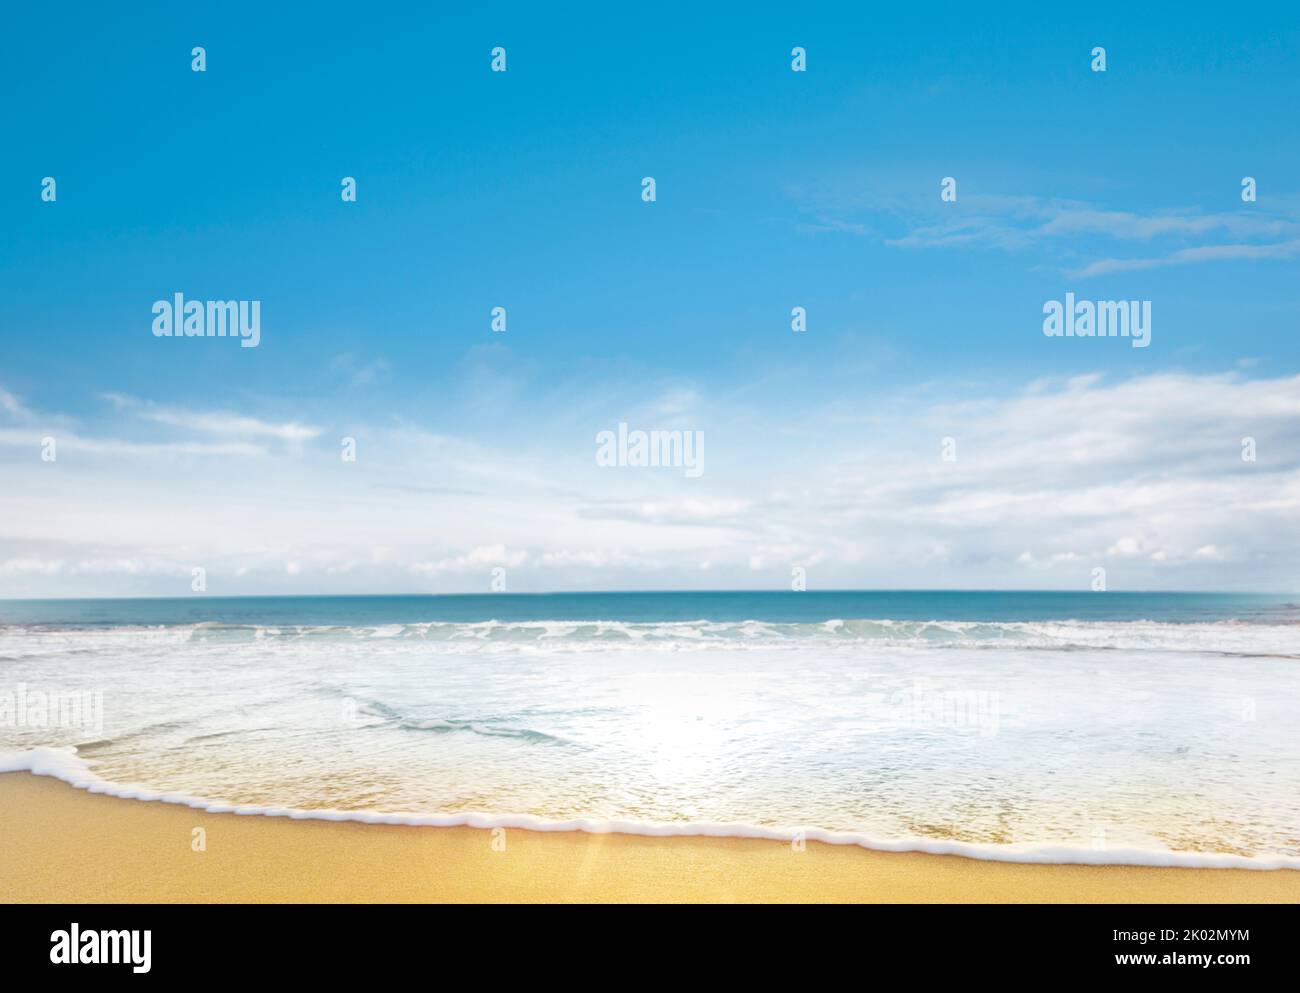 Wave on sandy beach in front of blue sea Stock Photo